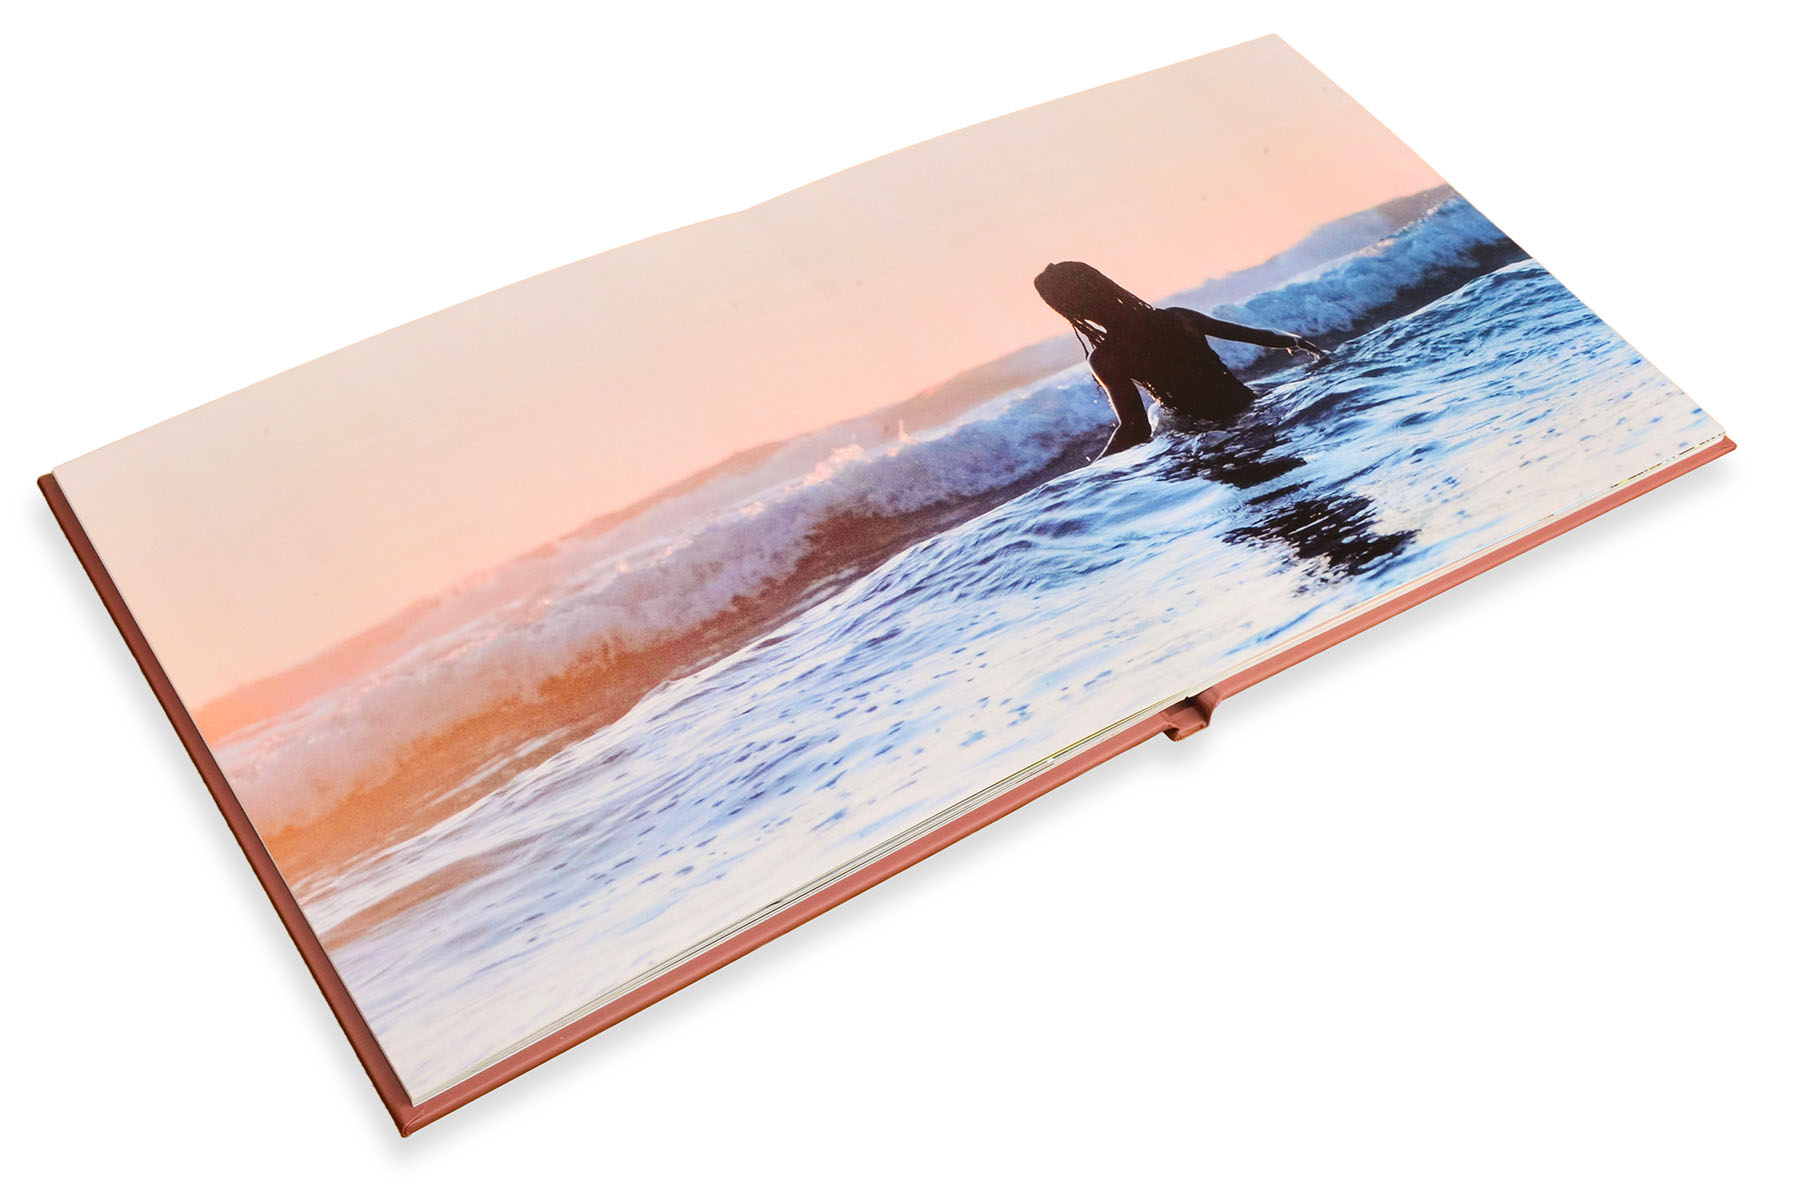 Layflat photo book with optimal viewing experience.